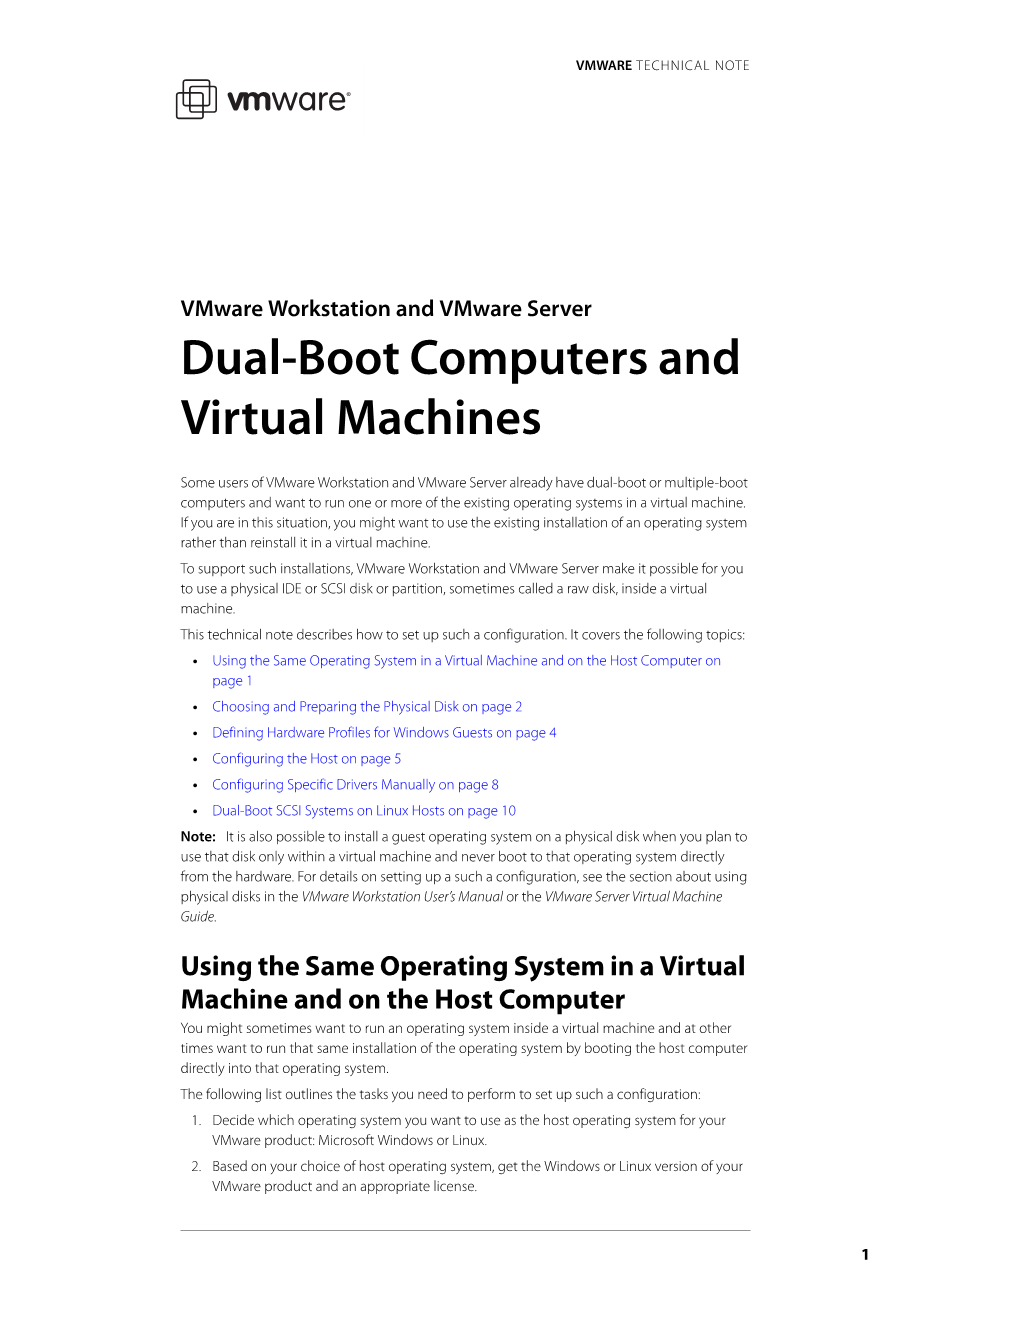 Dual-Boot Computers and Virtual Machines